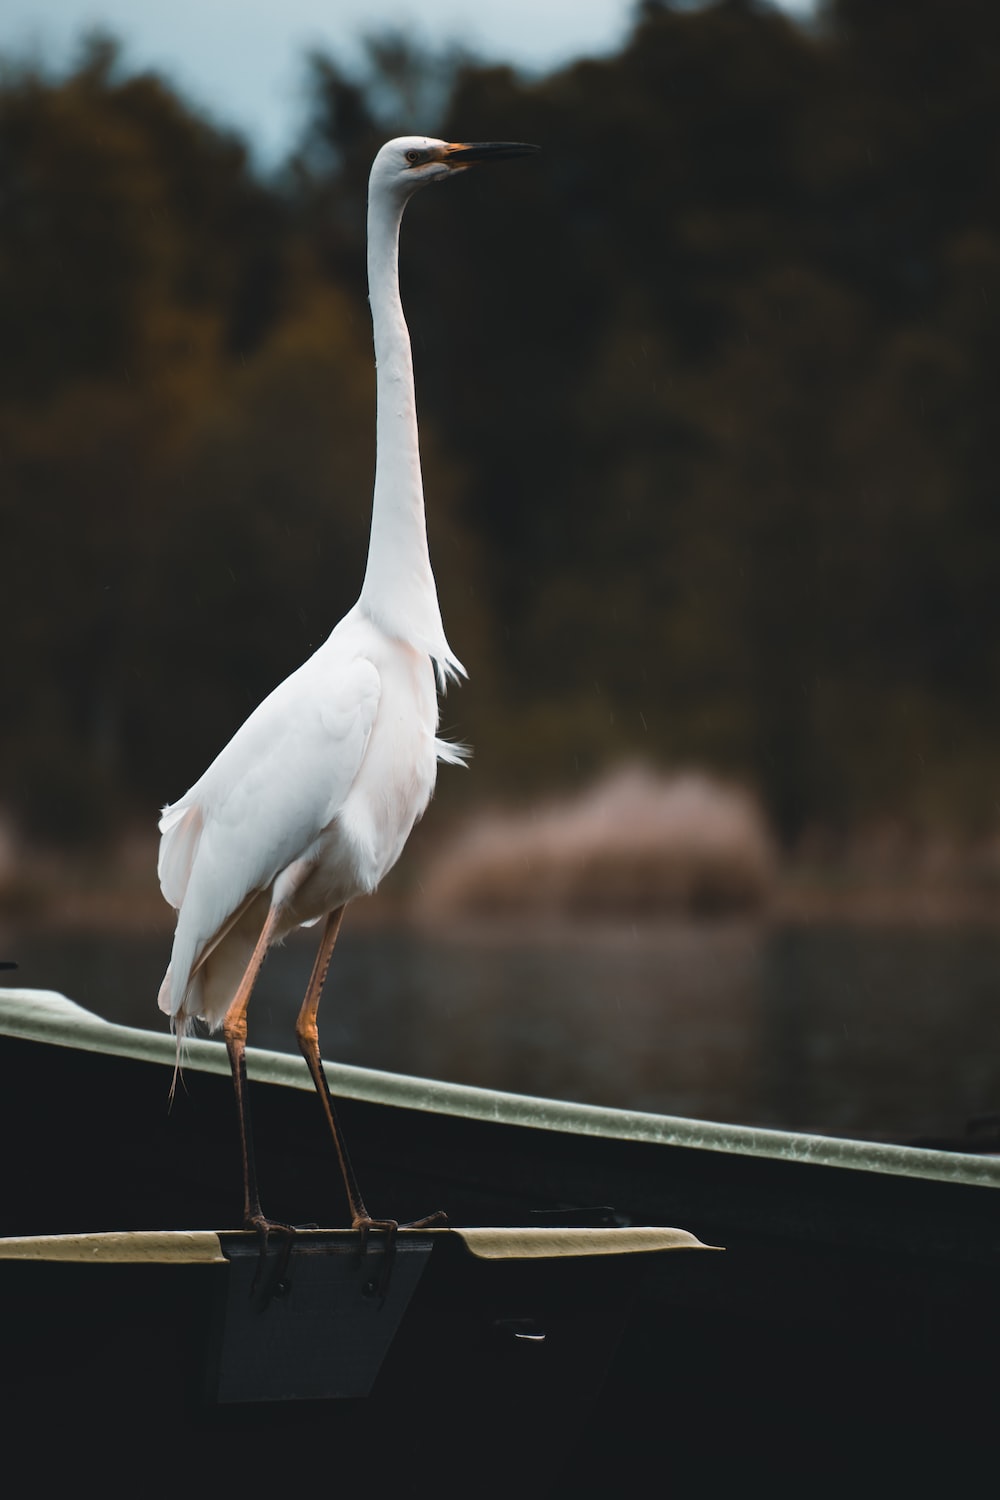 a white bird is standing on the edge of a boat